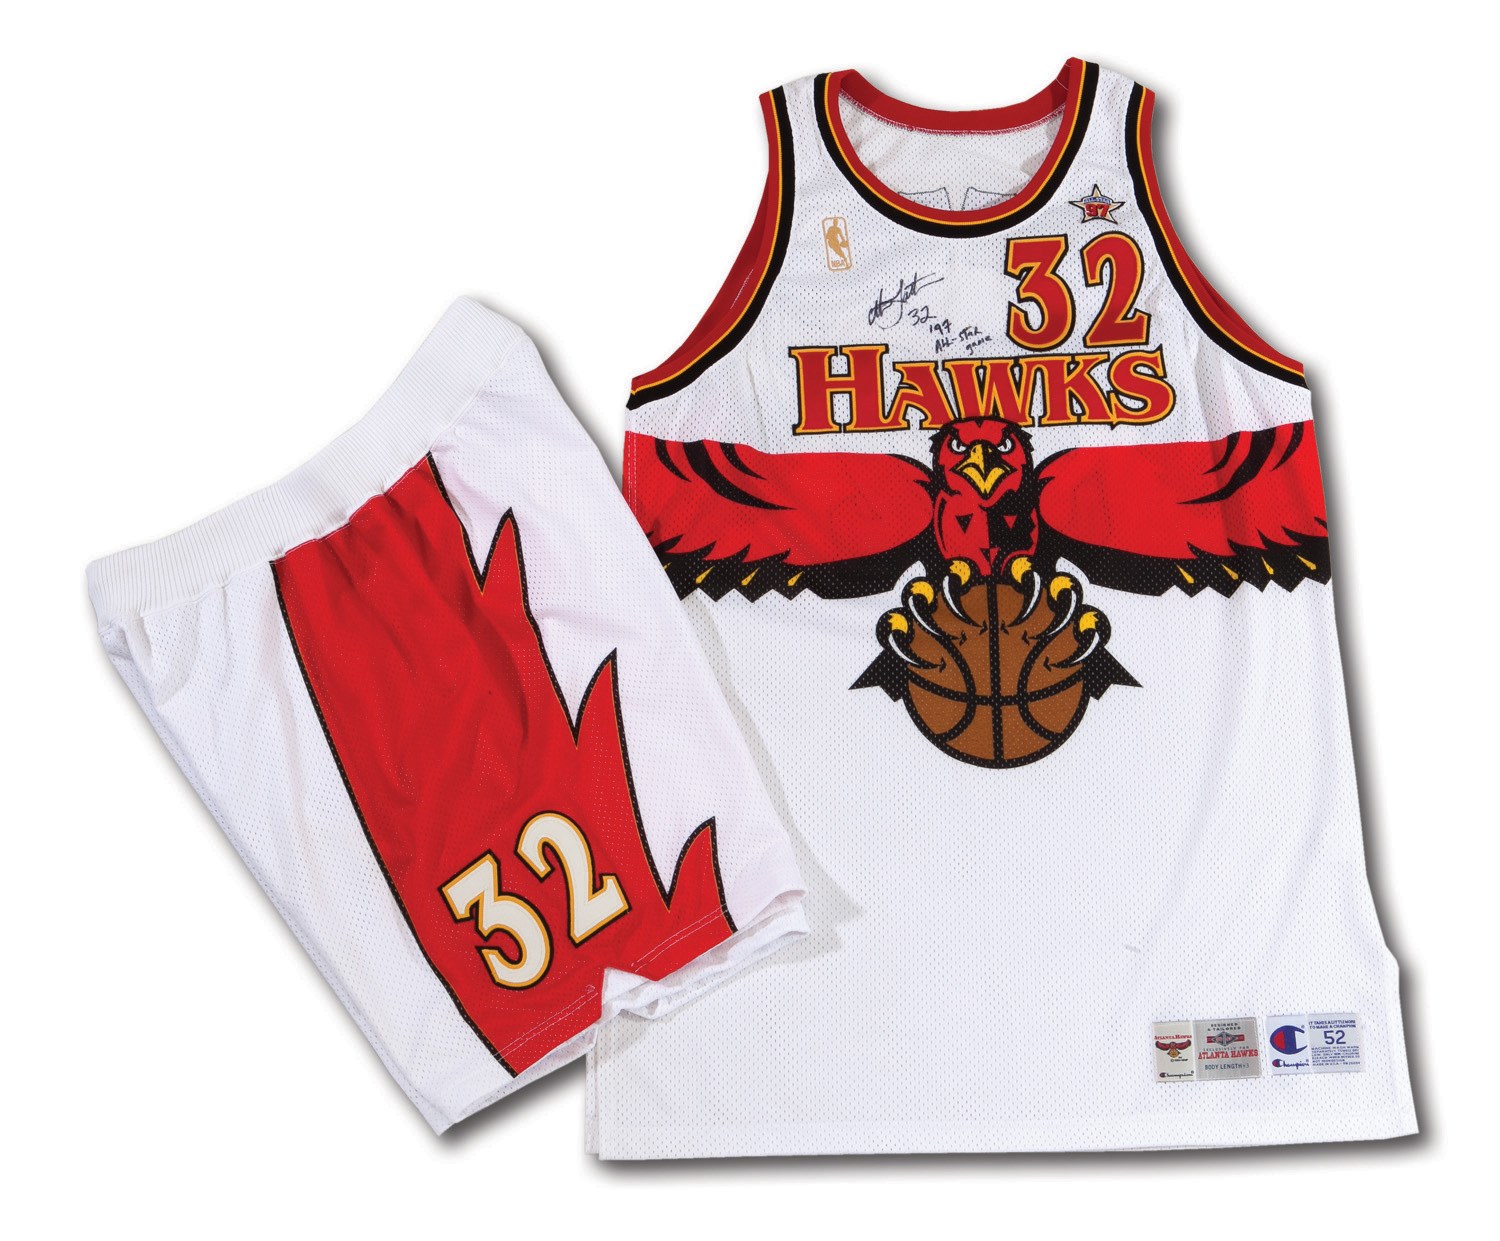 1997 nba all star game jersey